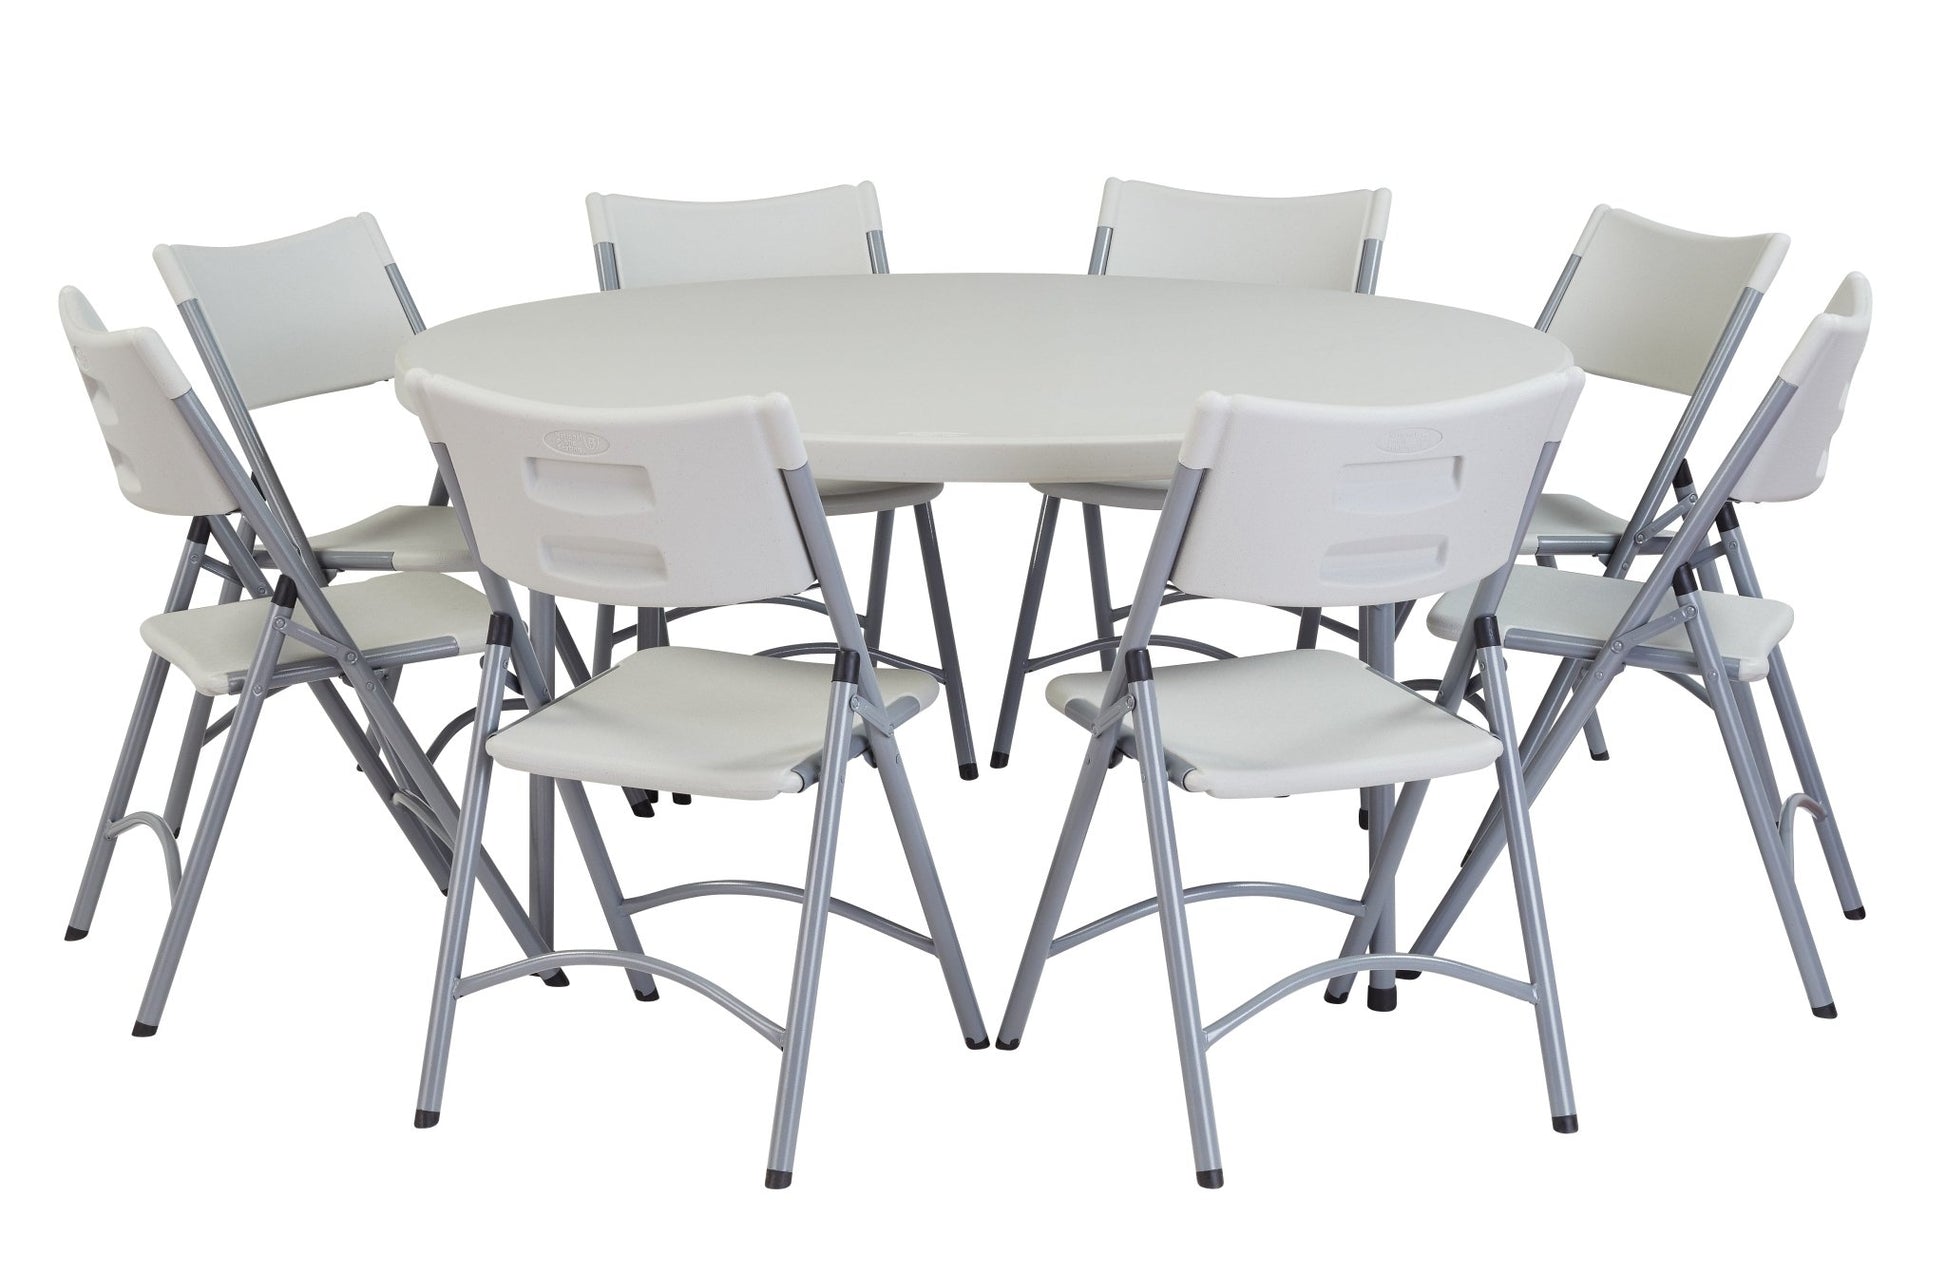 NPS Round Plastic Top Folding Table 60" Round (National Public Seating NPS-BT60R) - SchoolOutlet